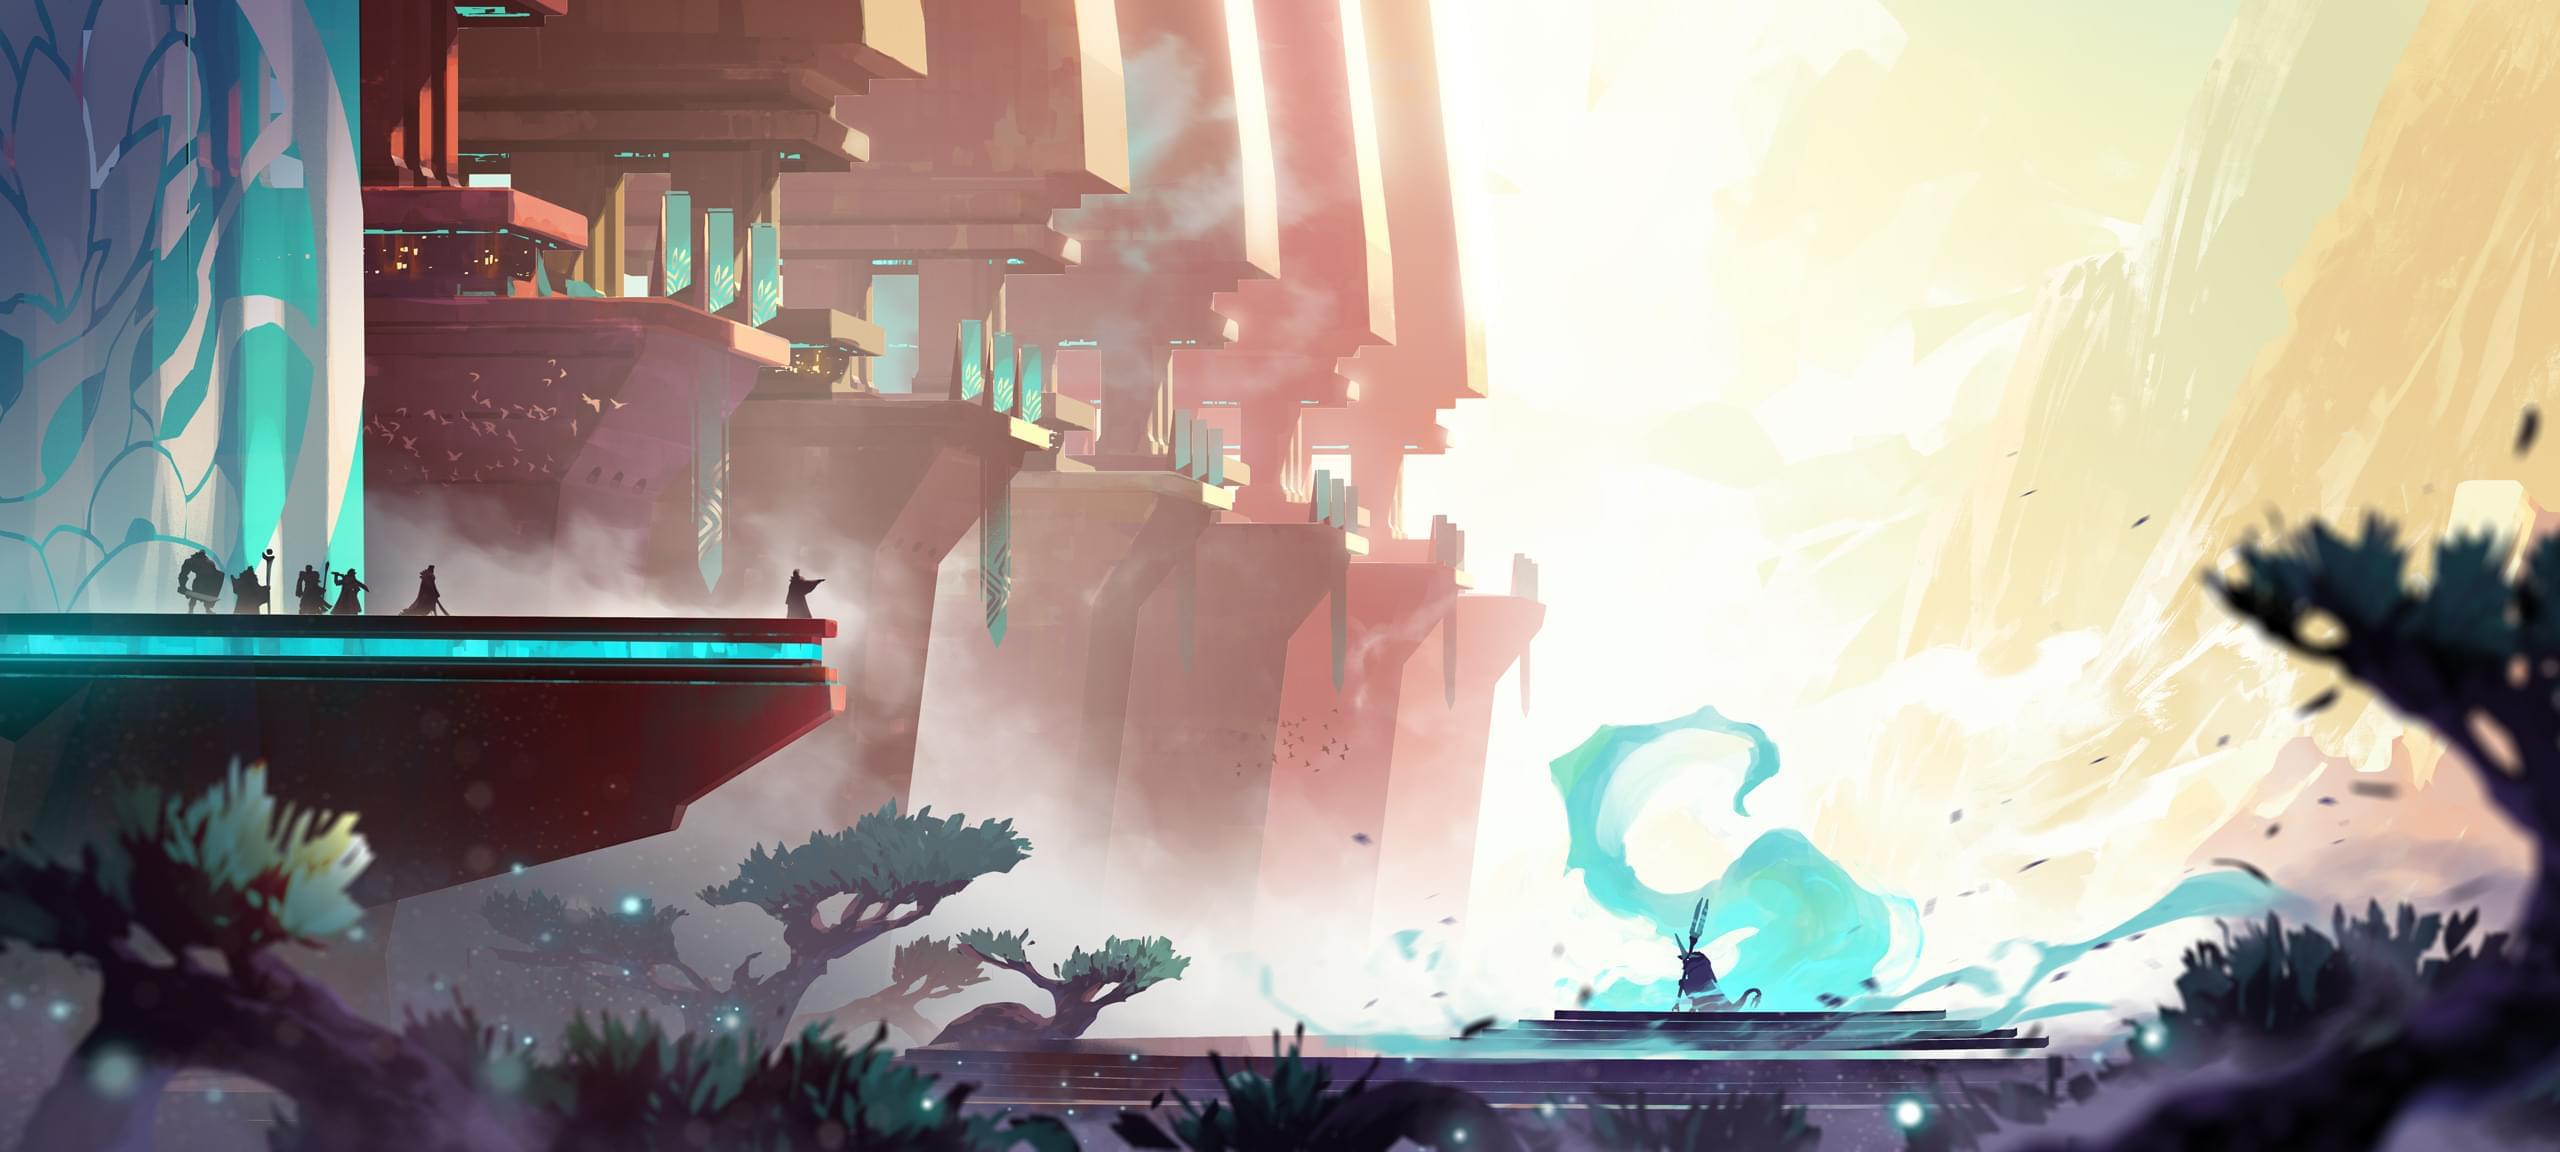 video game, duelyst